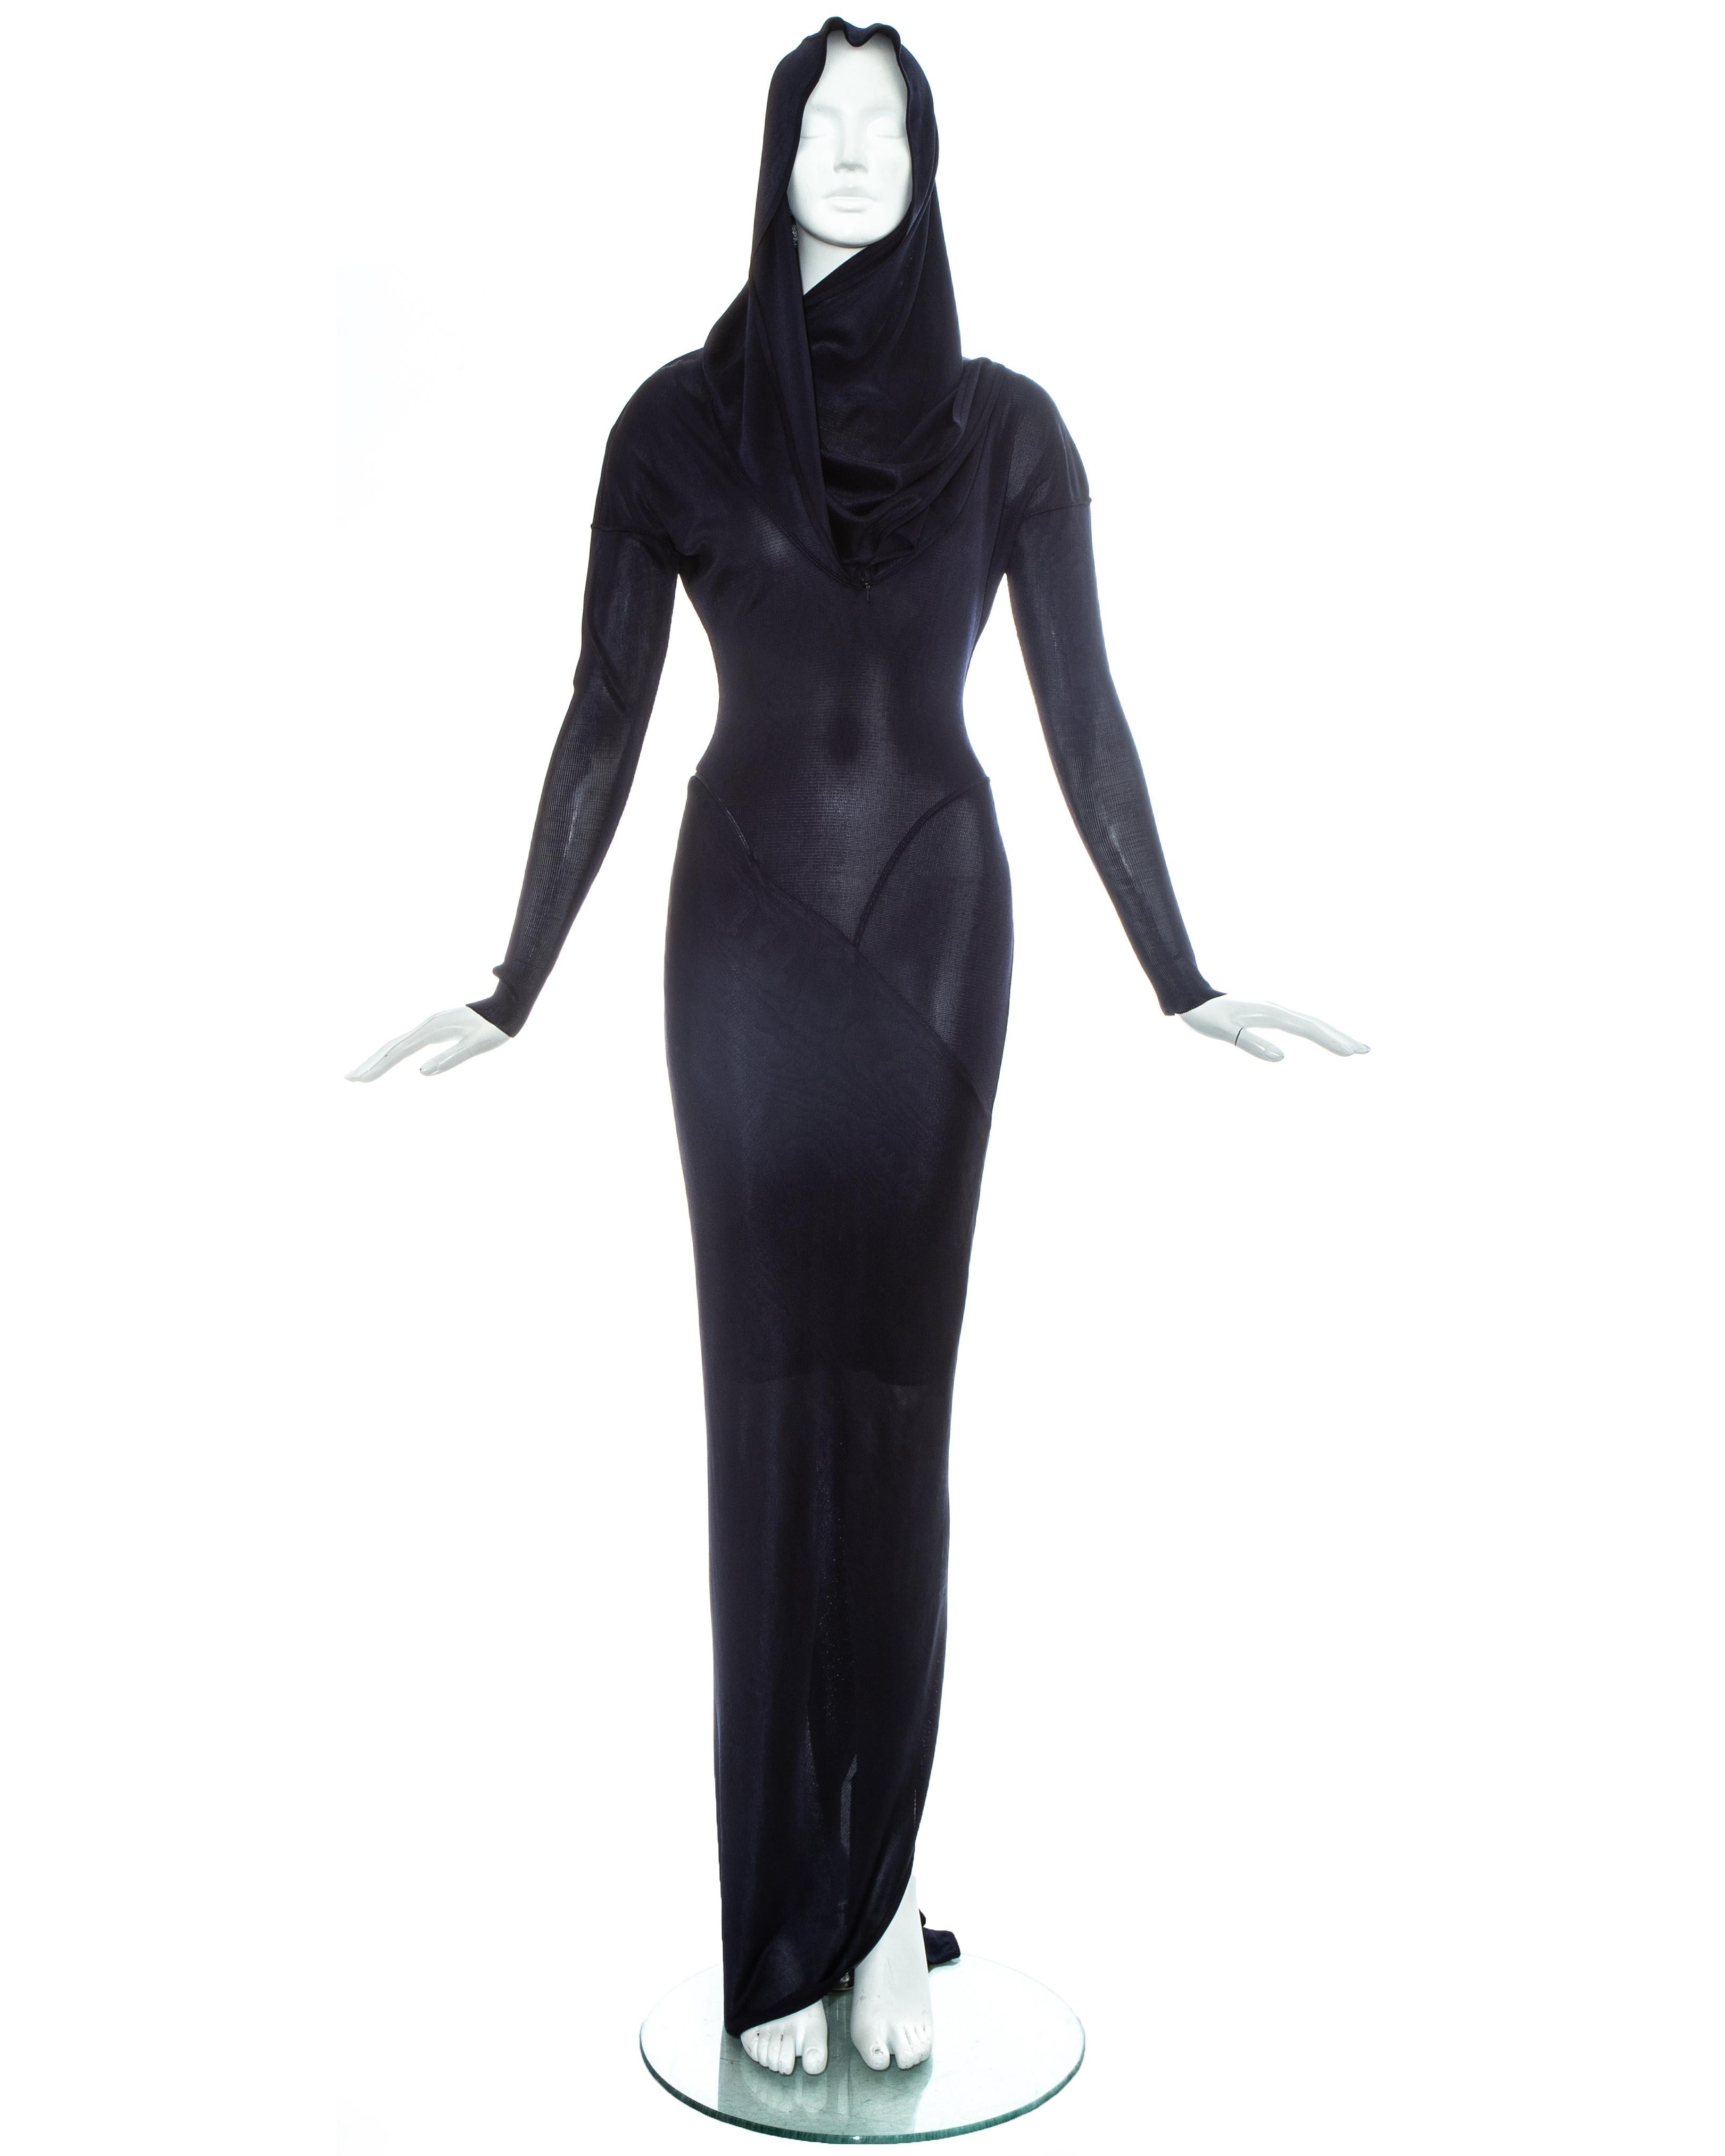 Azzedine Alaia navy acetate bias cut evening dress with signature draped hood, long zip fastening coiled around the body, bias cut panels with flat seams which contour the body and back vent with train.

One of Azzedine Alaia's most iconic and